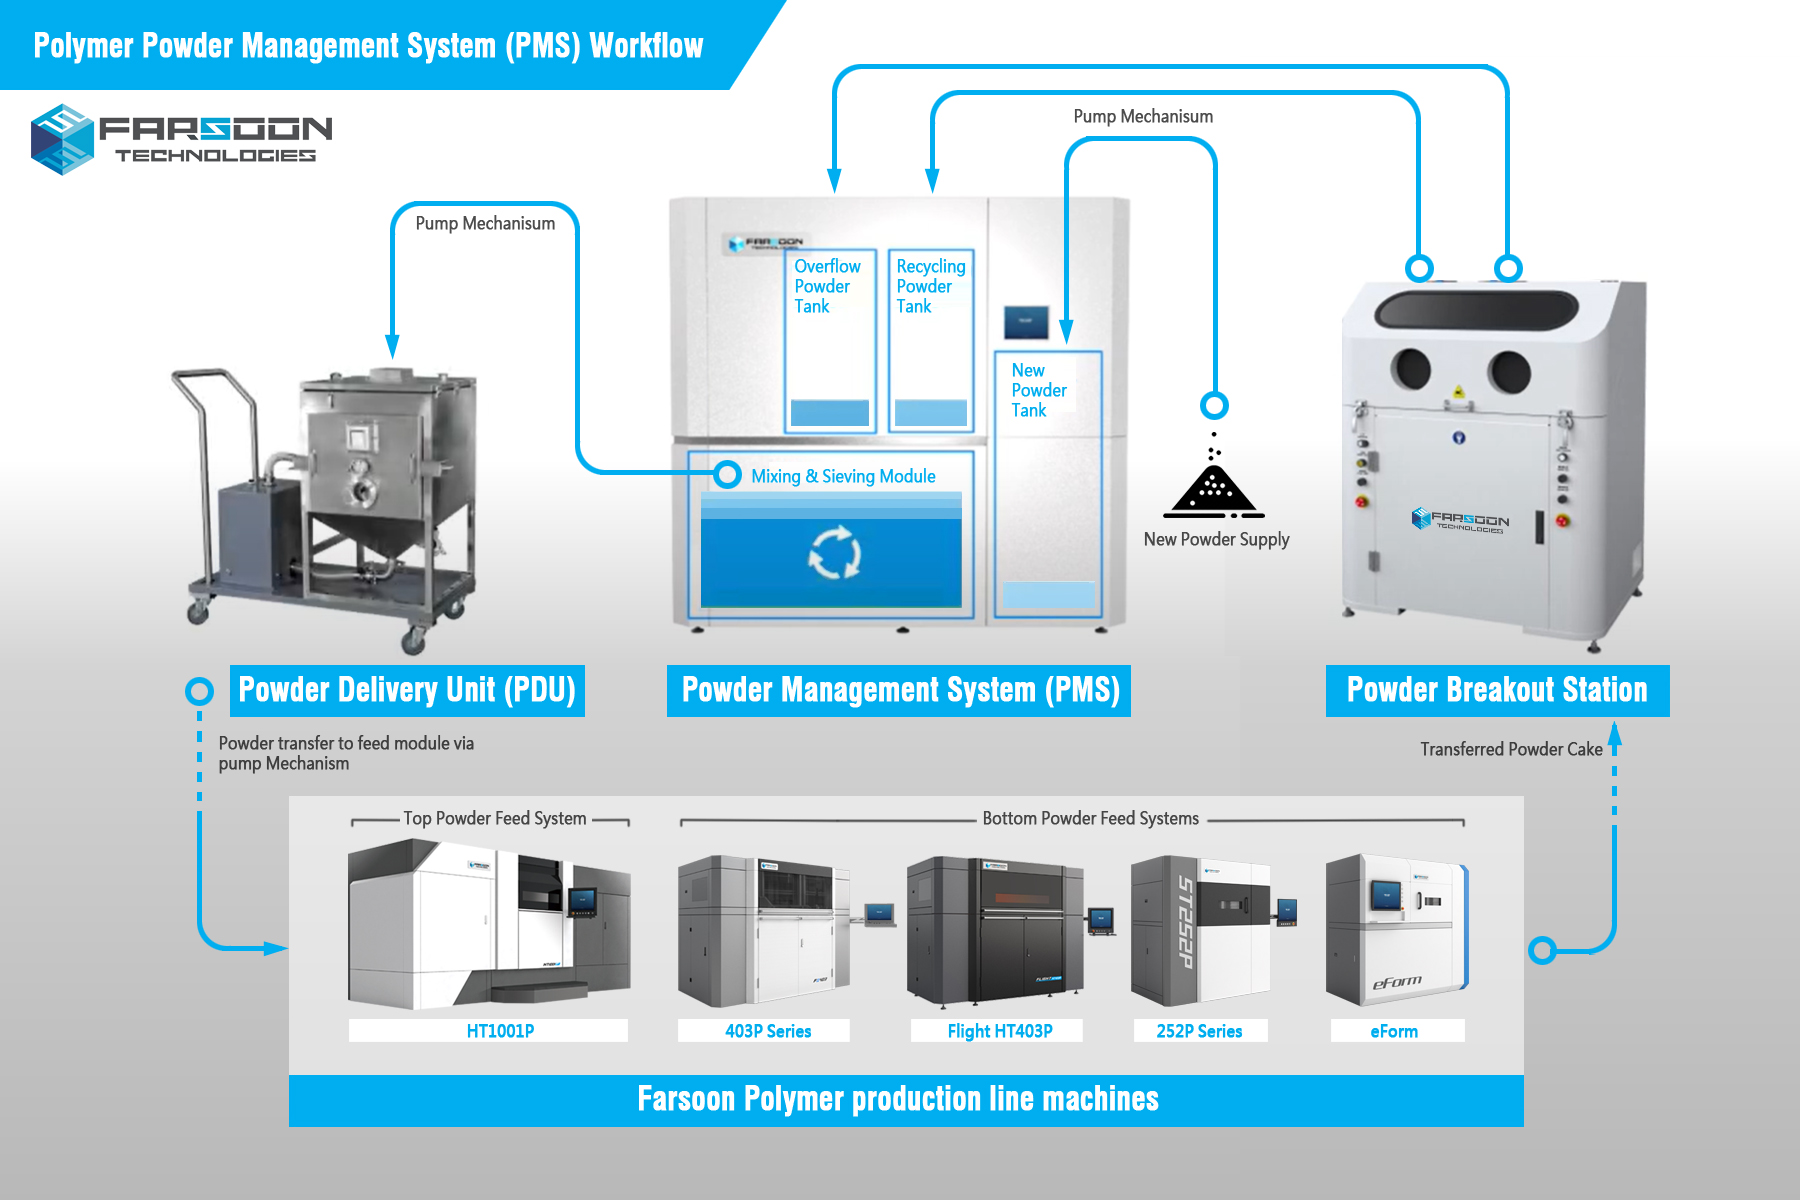 Farsoon's has designed its PMS system to fit into its broader product ecosystem. Image via Farsoon.